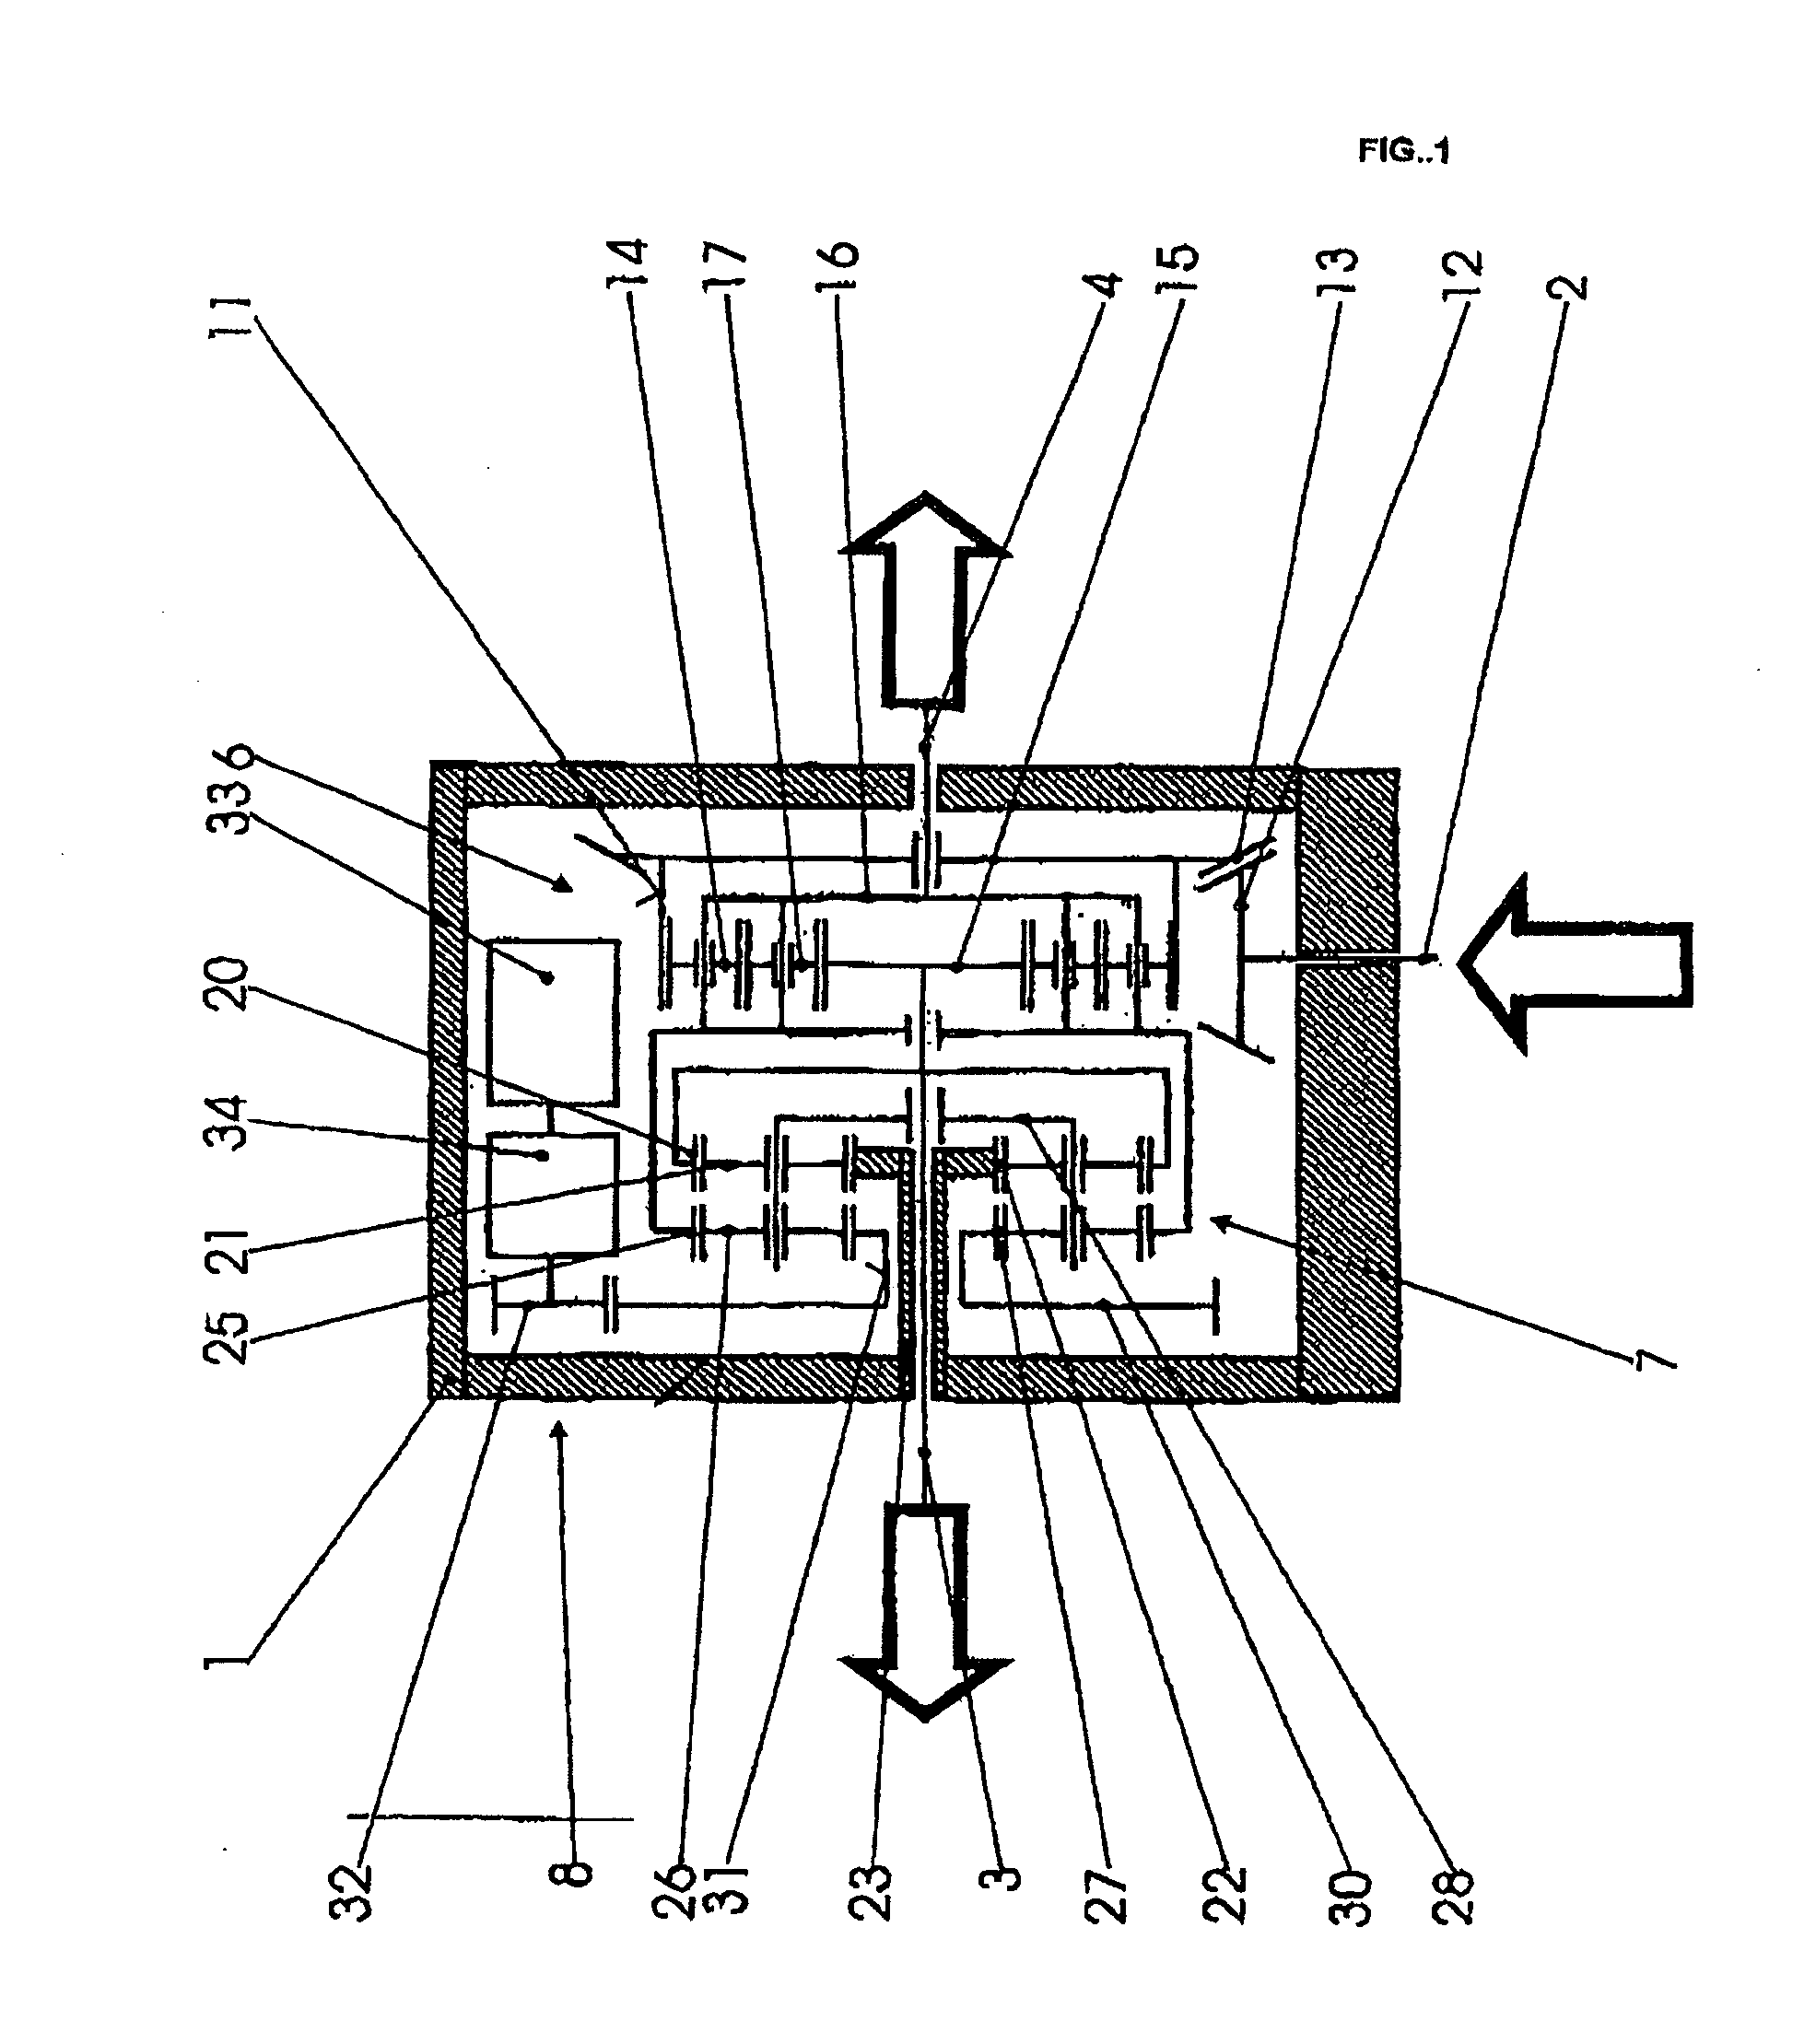 Differnttal gearing unit with controllable torque and rotational speed distribution